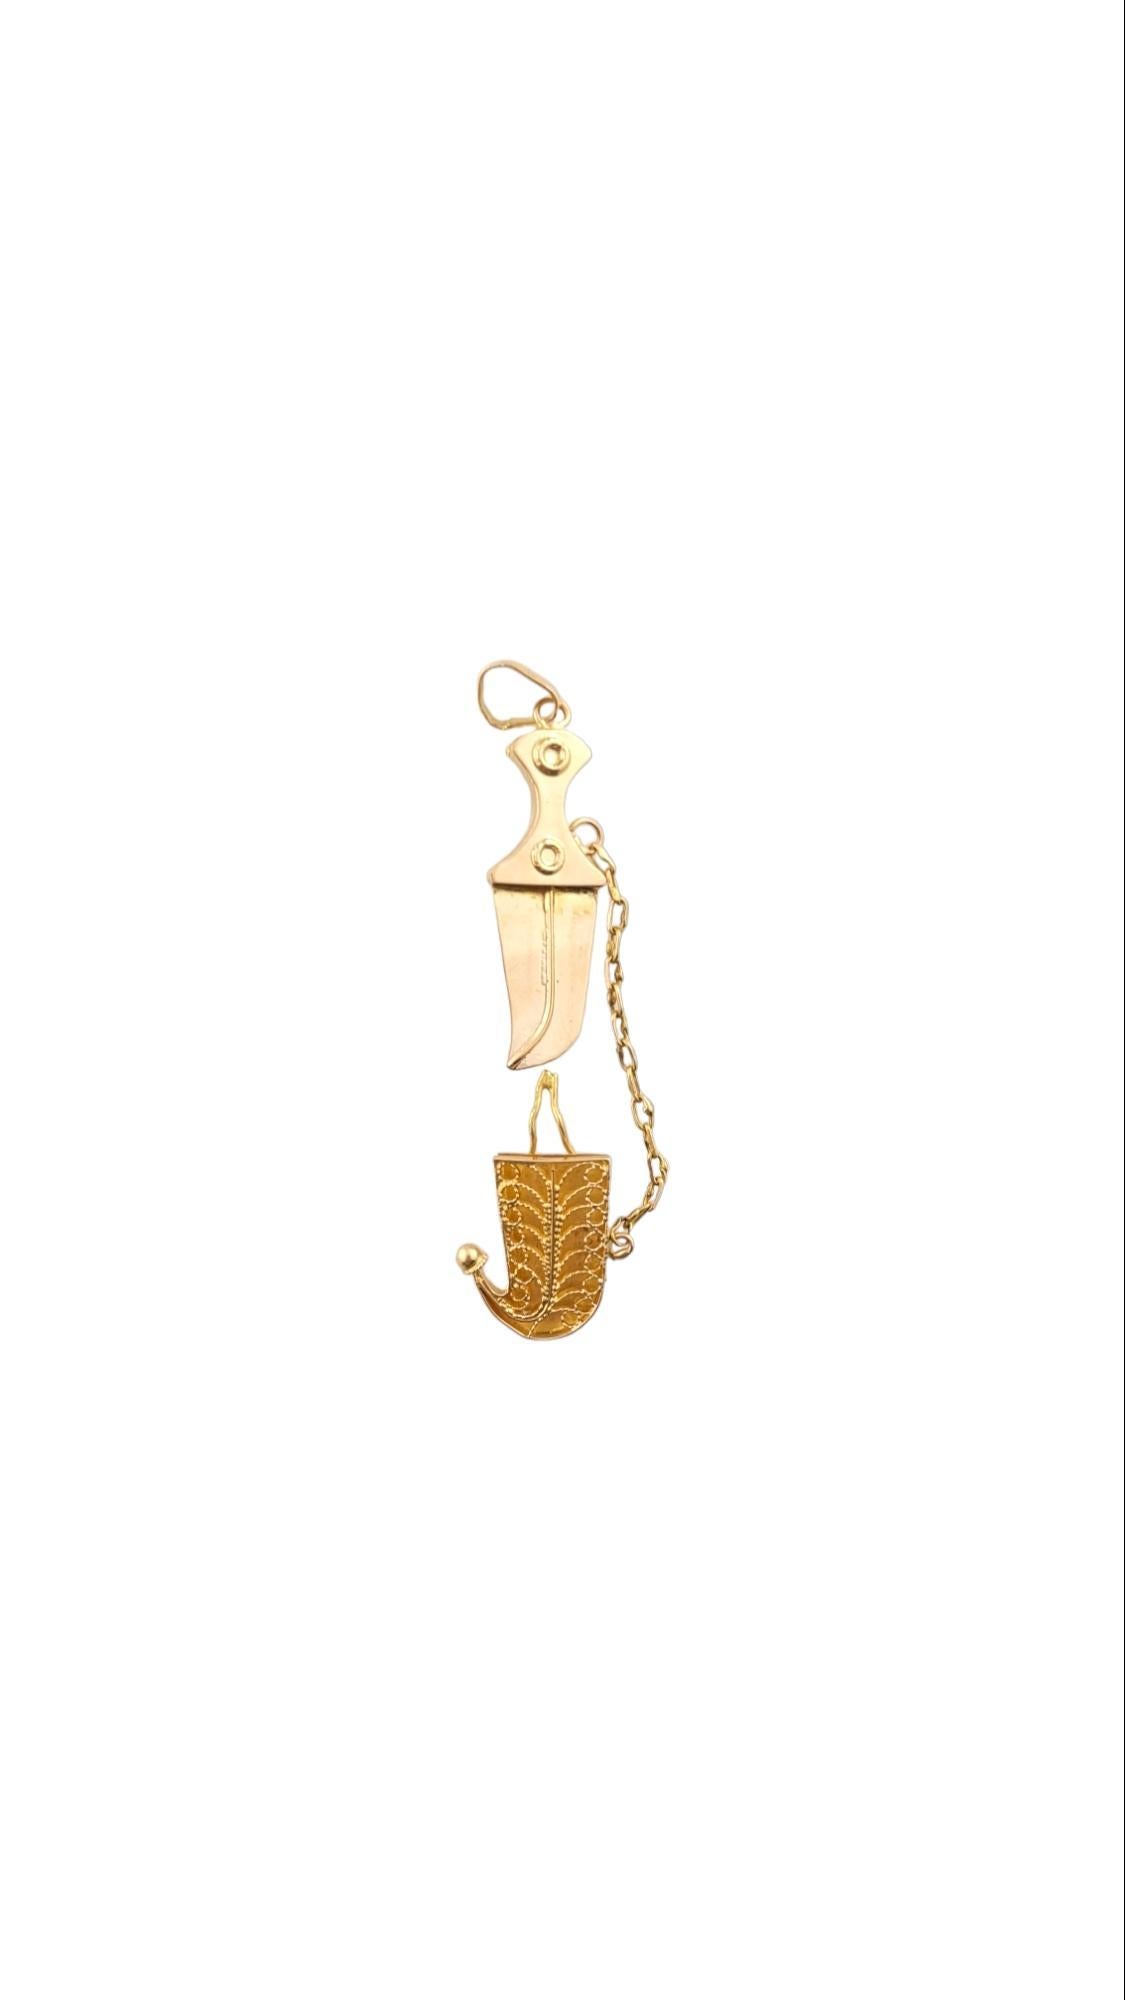 Moveable 21K Yellow Gold Dagger Charm #15814 In Good Condition For Sale In Washington Depot, CT